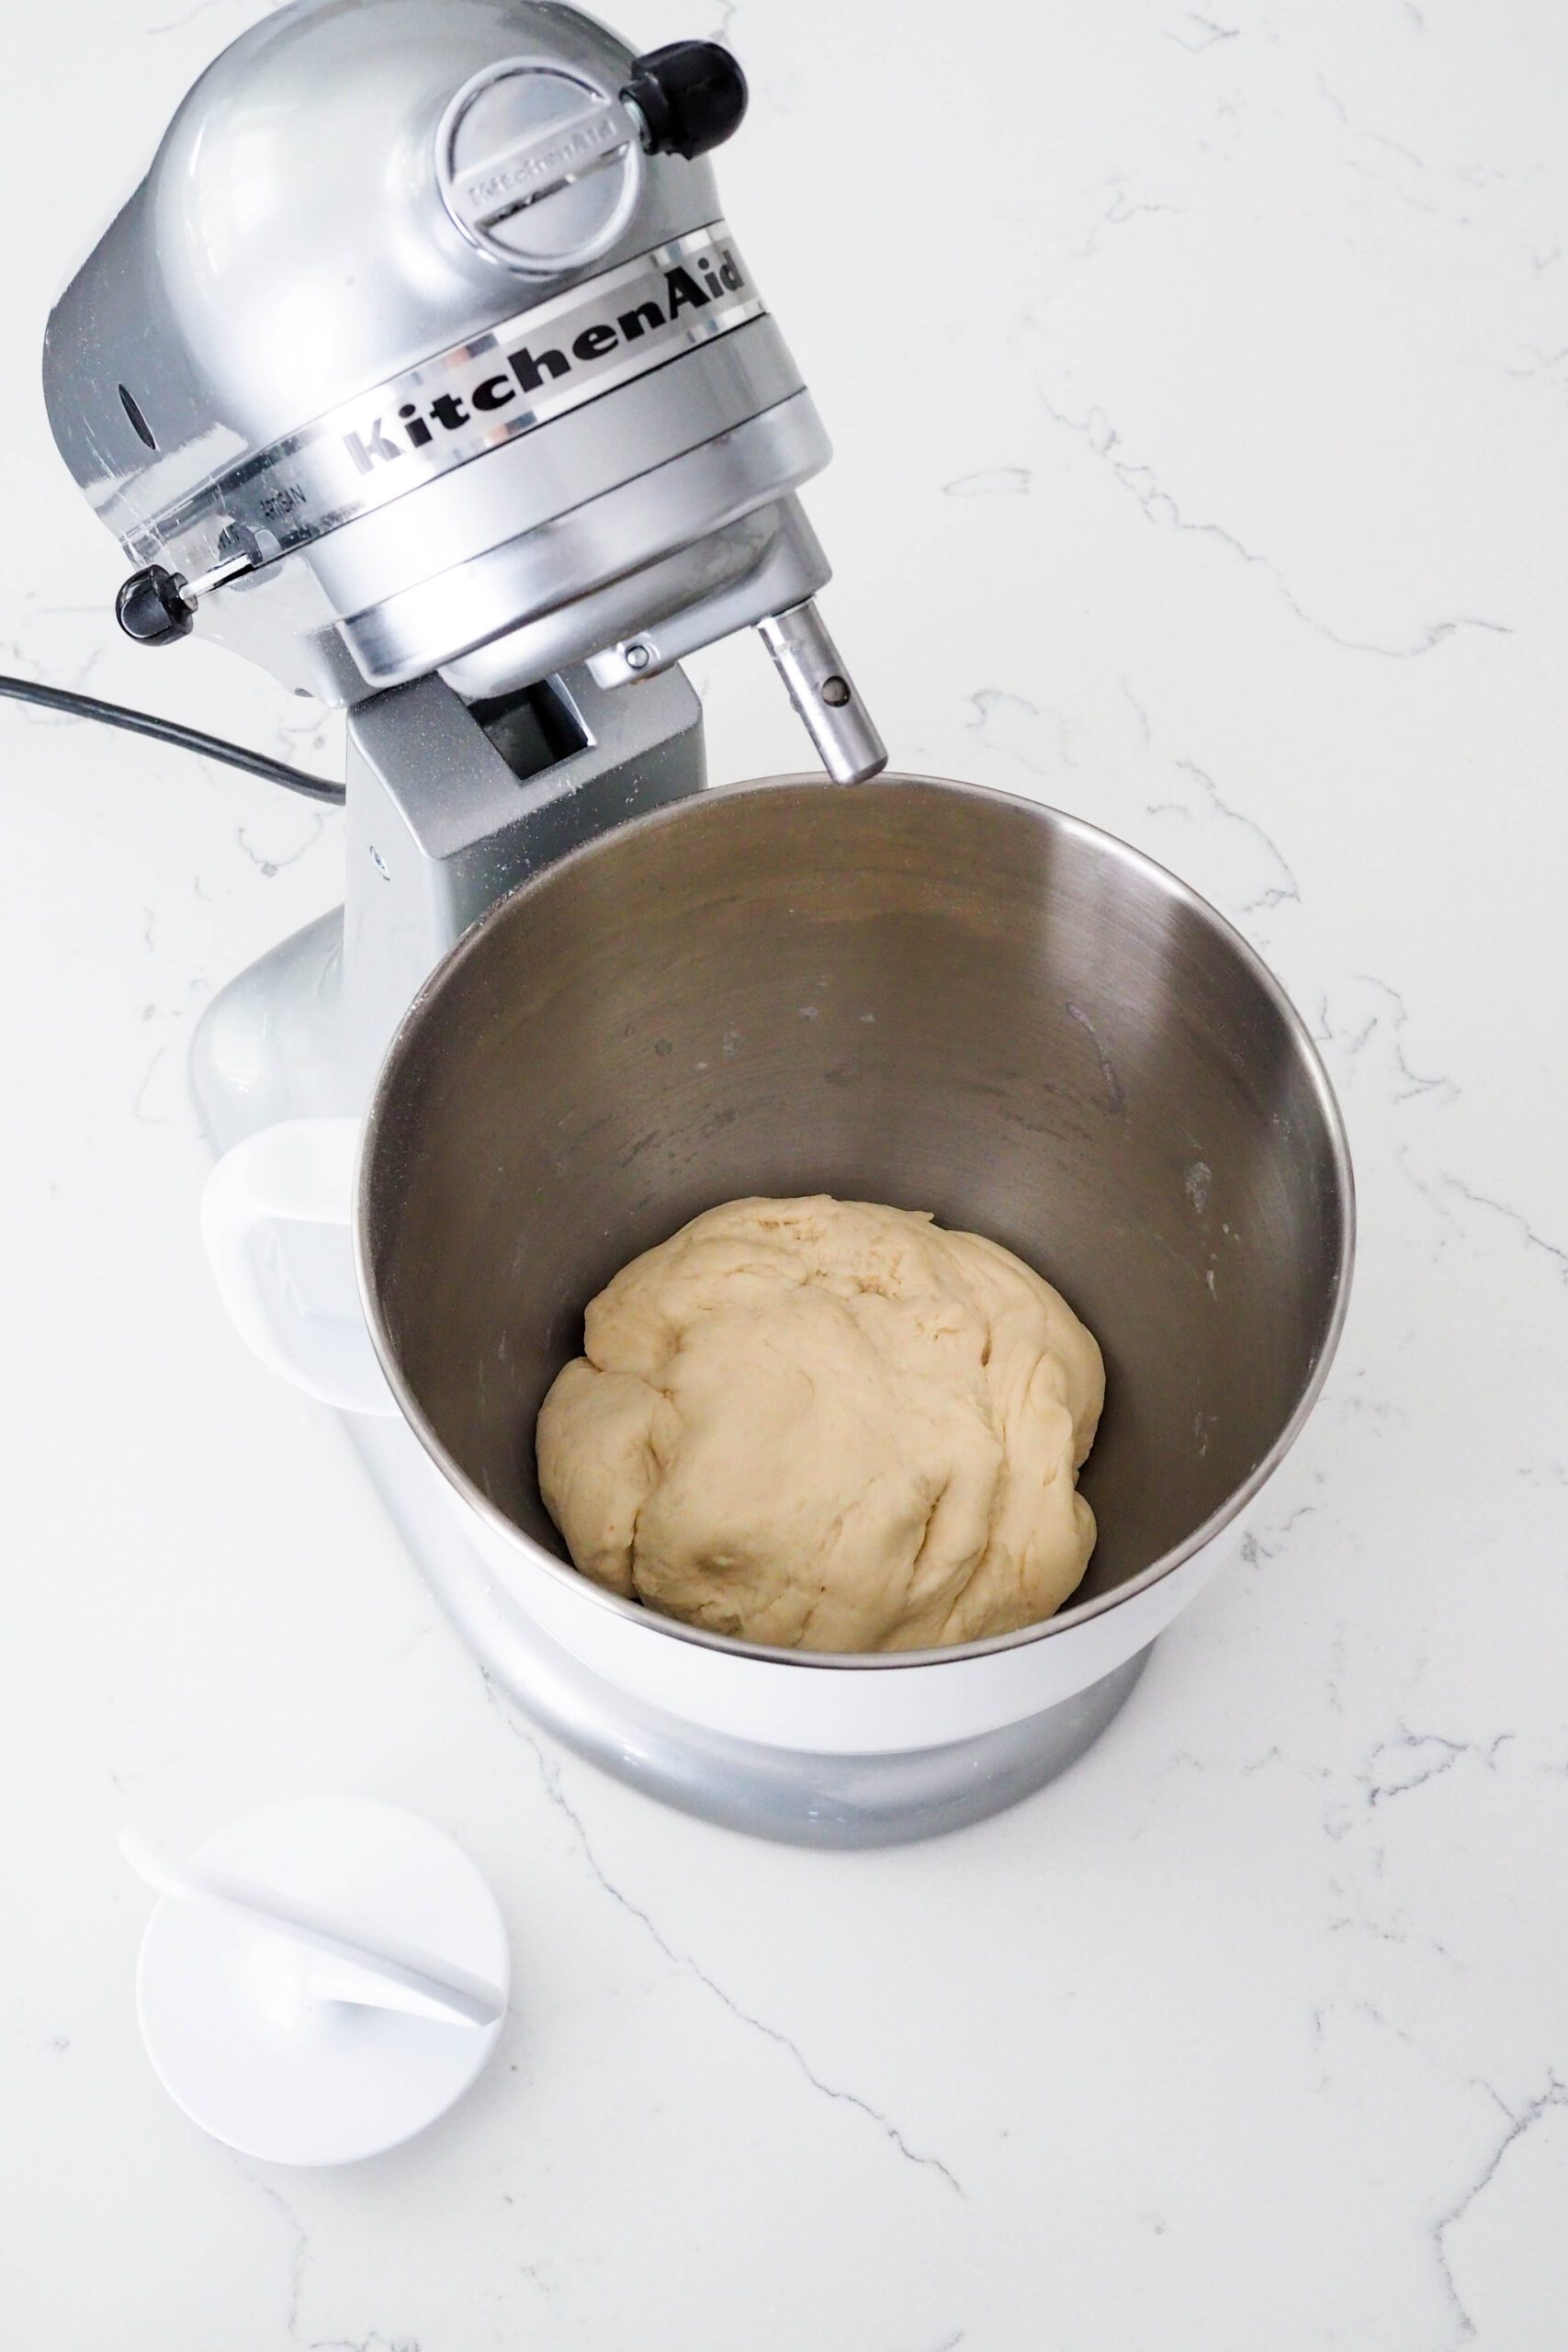 Freshly kneaded enriched dough in a mixer bowl.